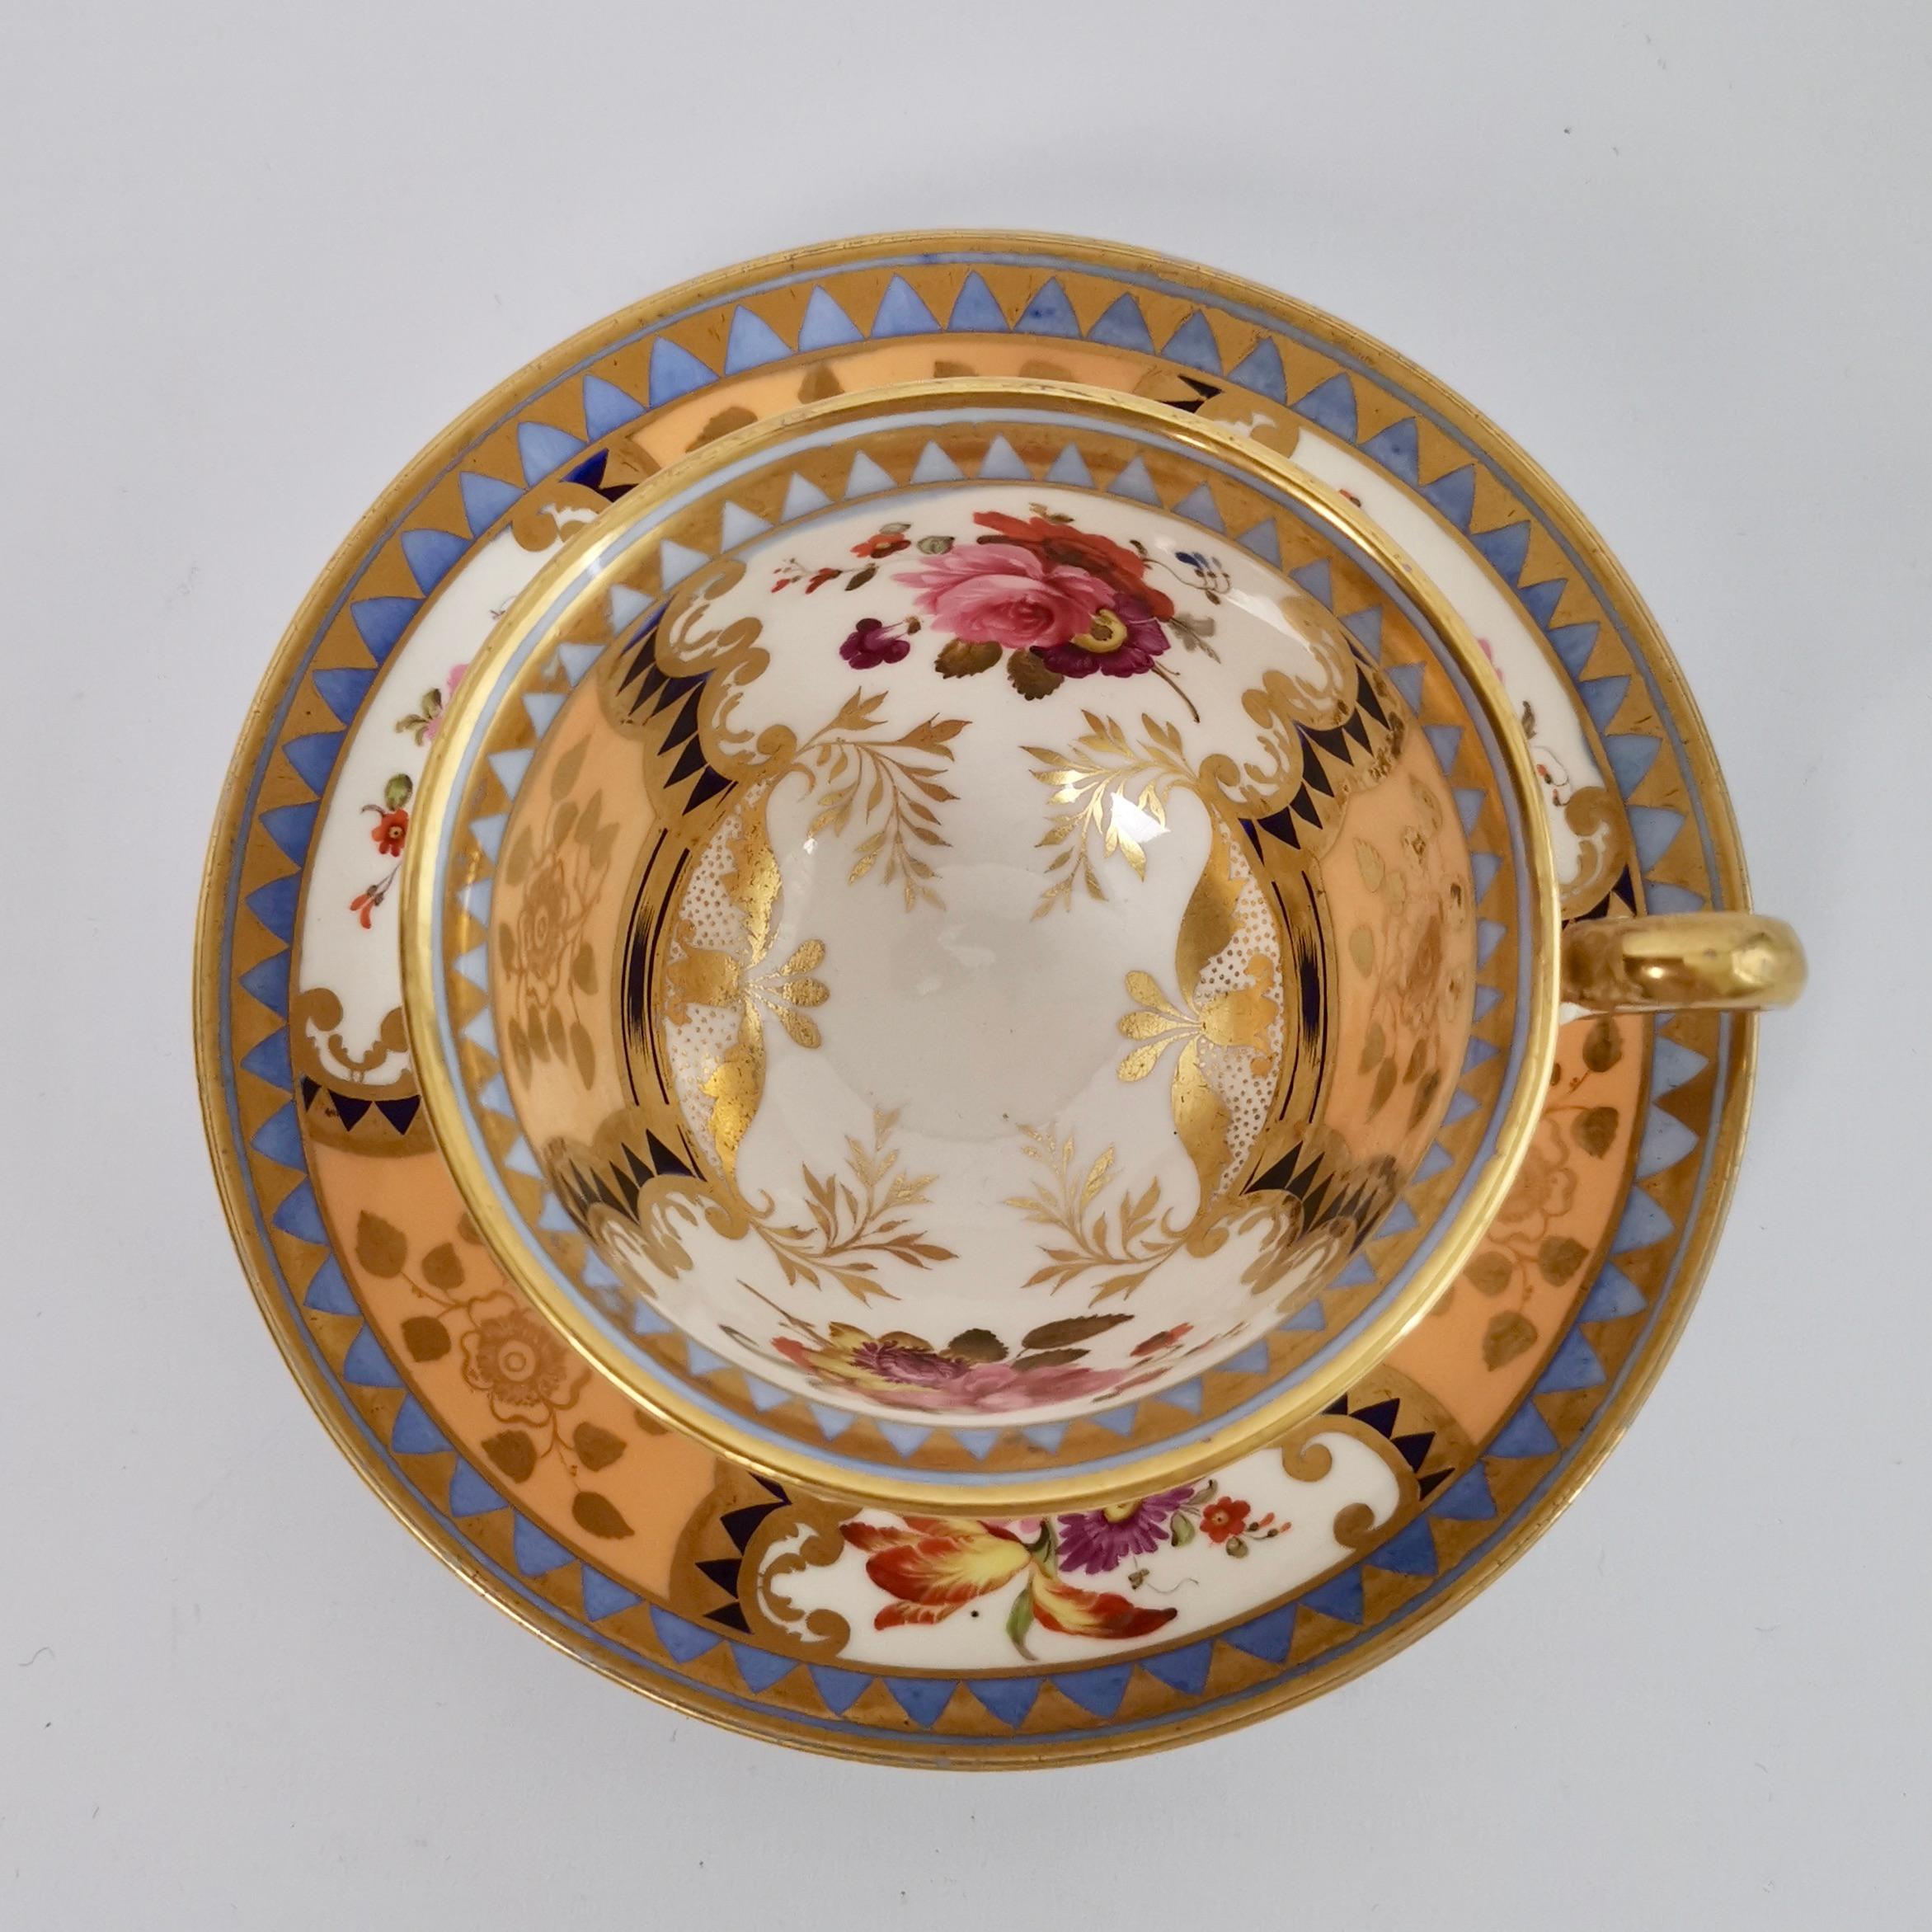 English Ridgway Porcelain Teacup, Apricot, Periwinkle and Flowers, Regency circa 1820